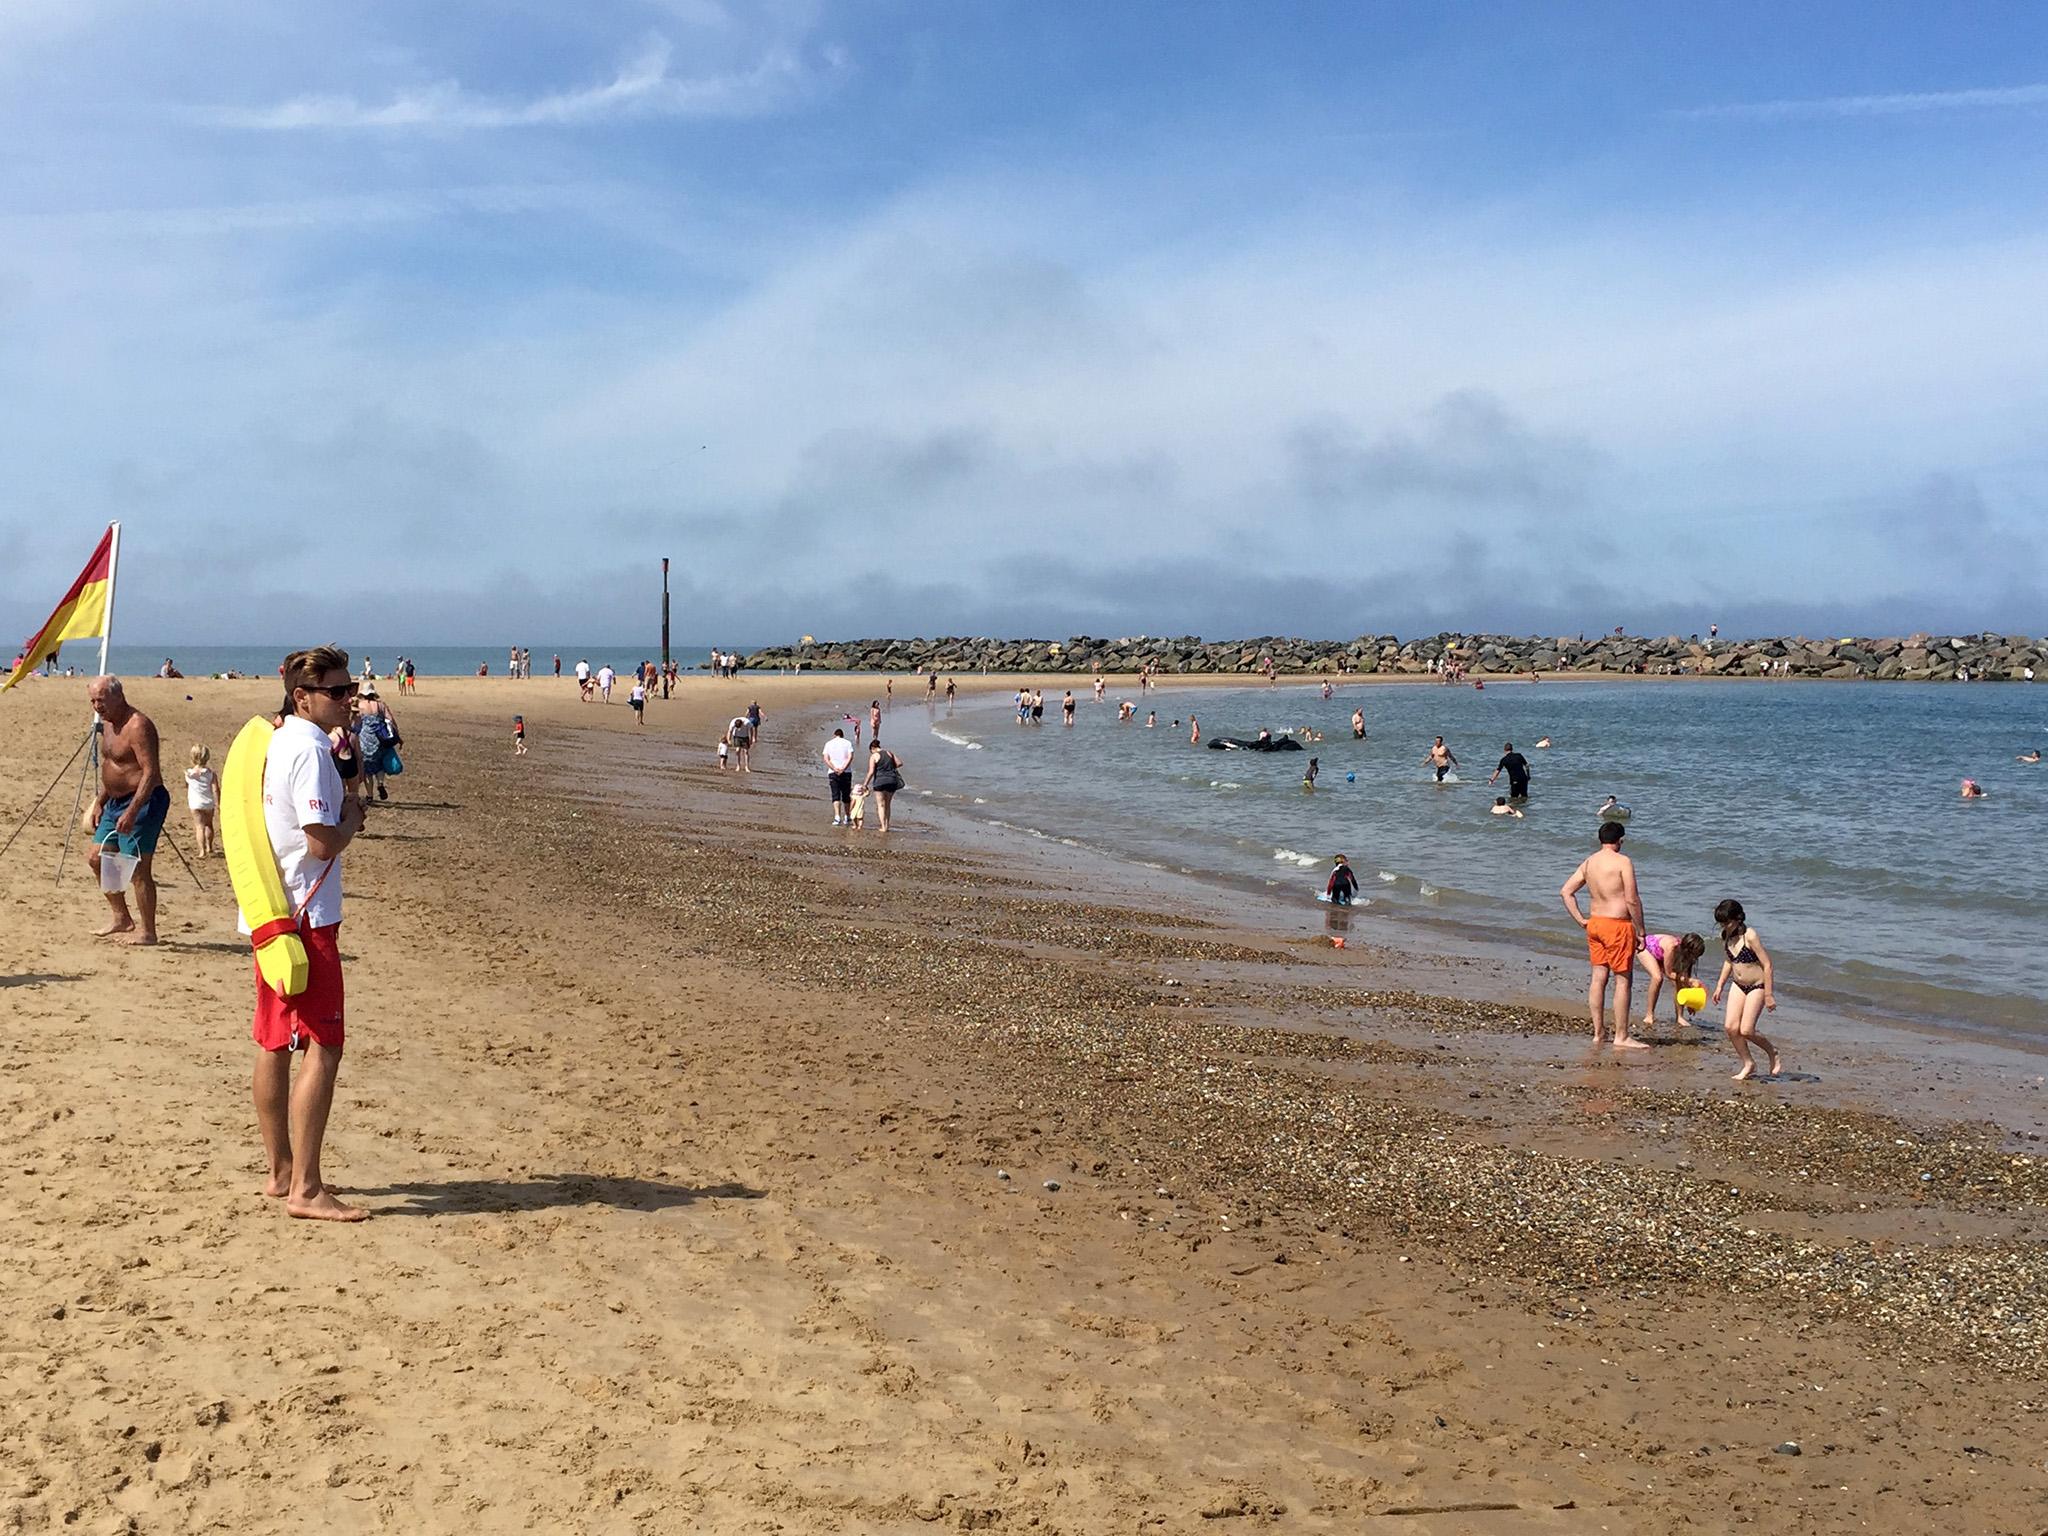 Sea Palling beach, where a man has died after a group of swimmers got caught in a rip tide